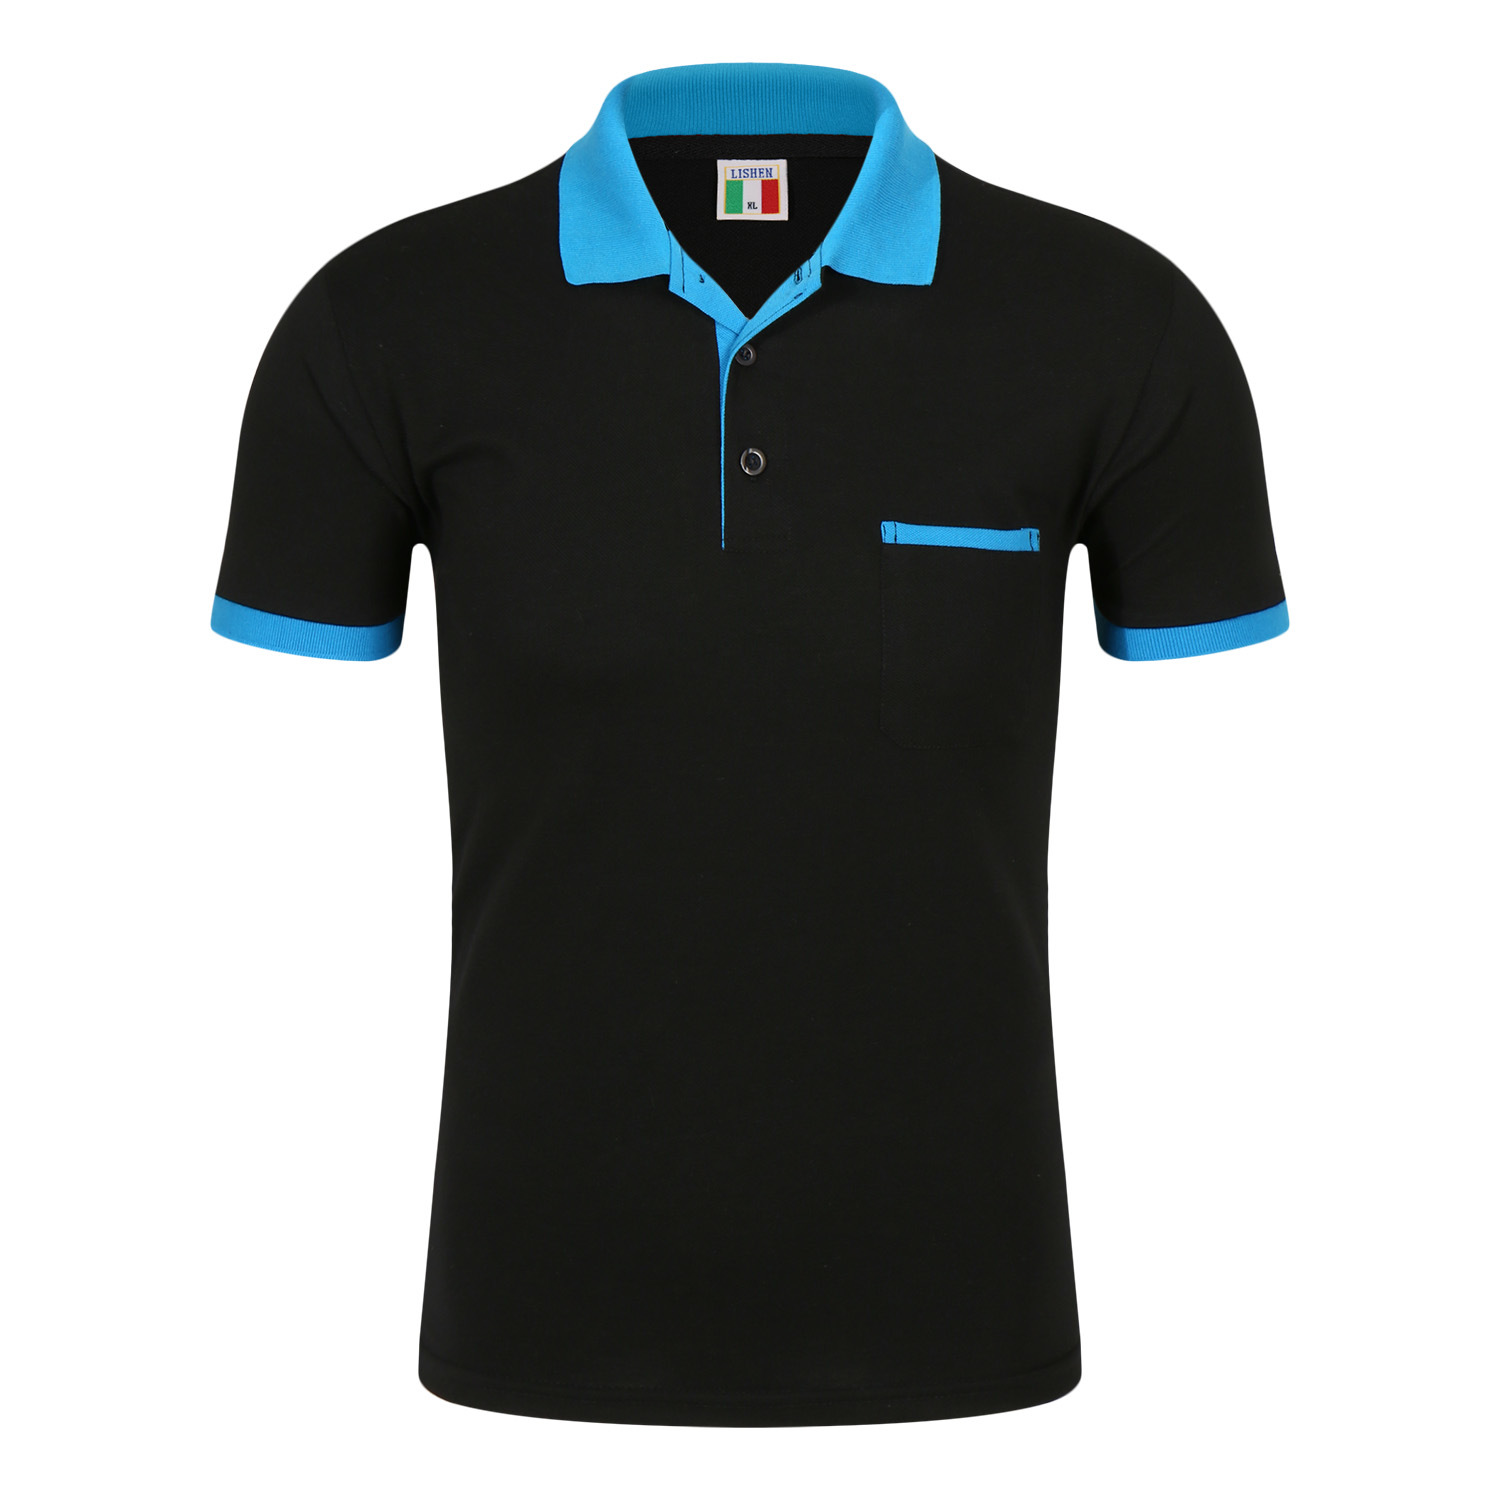 220GSM Polo T-Shirt in Contrast Colors in Neck, Cuff & Pocket